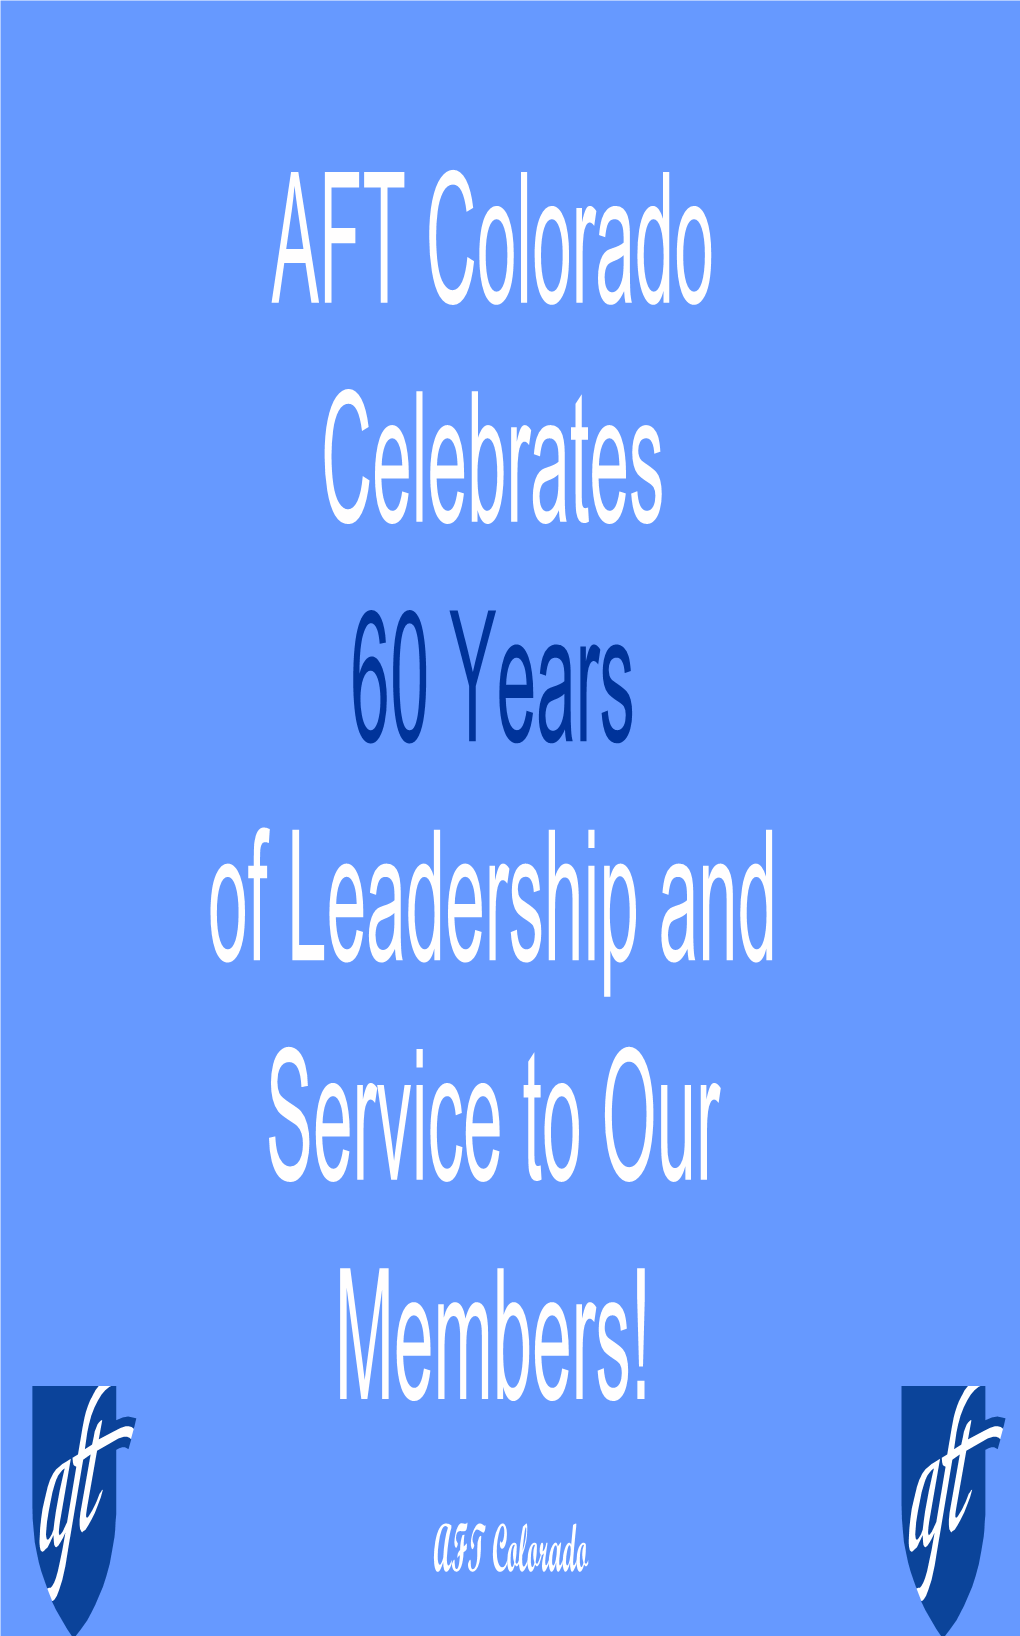 Of Leadership and Service to Our Members!